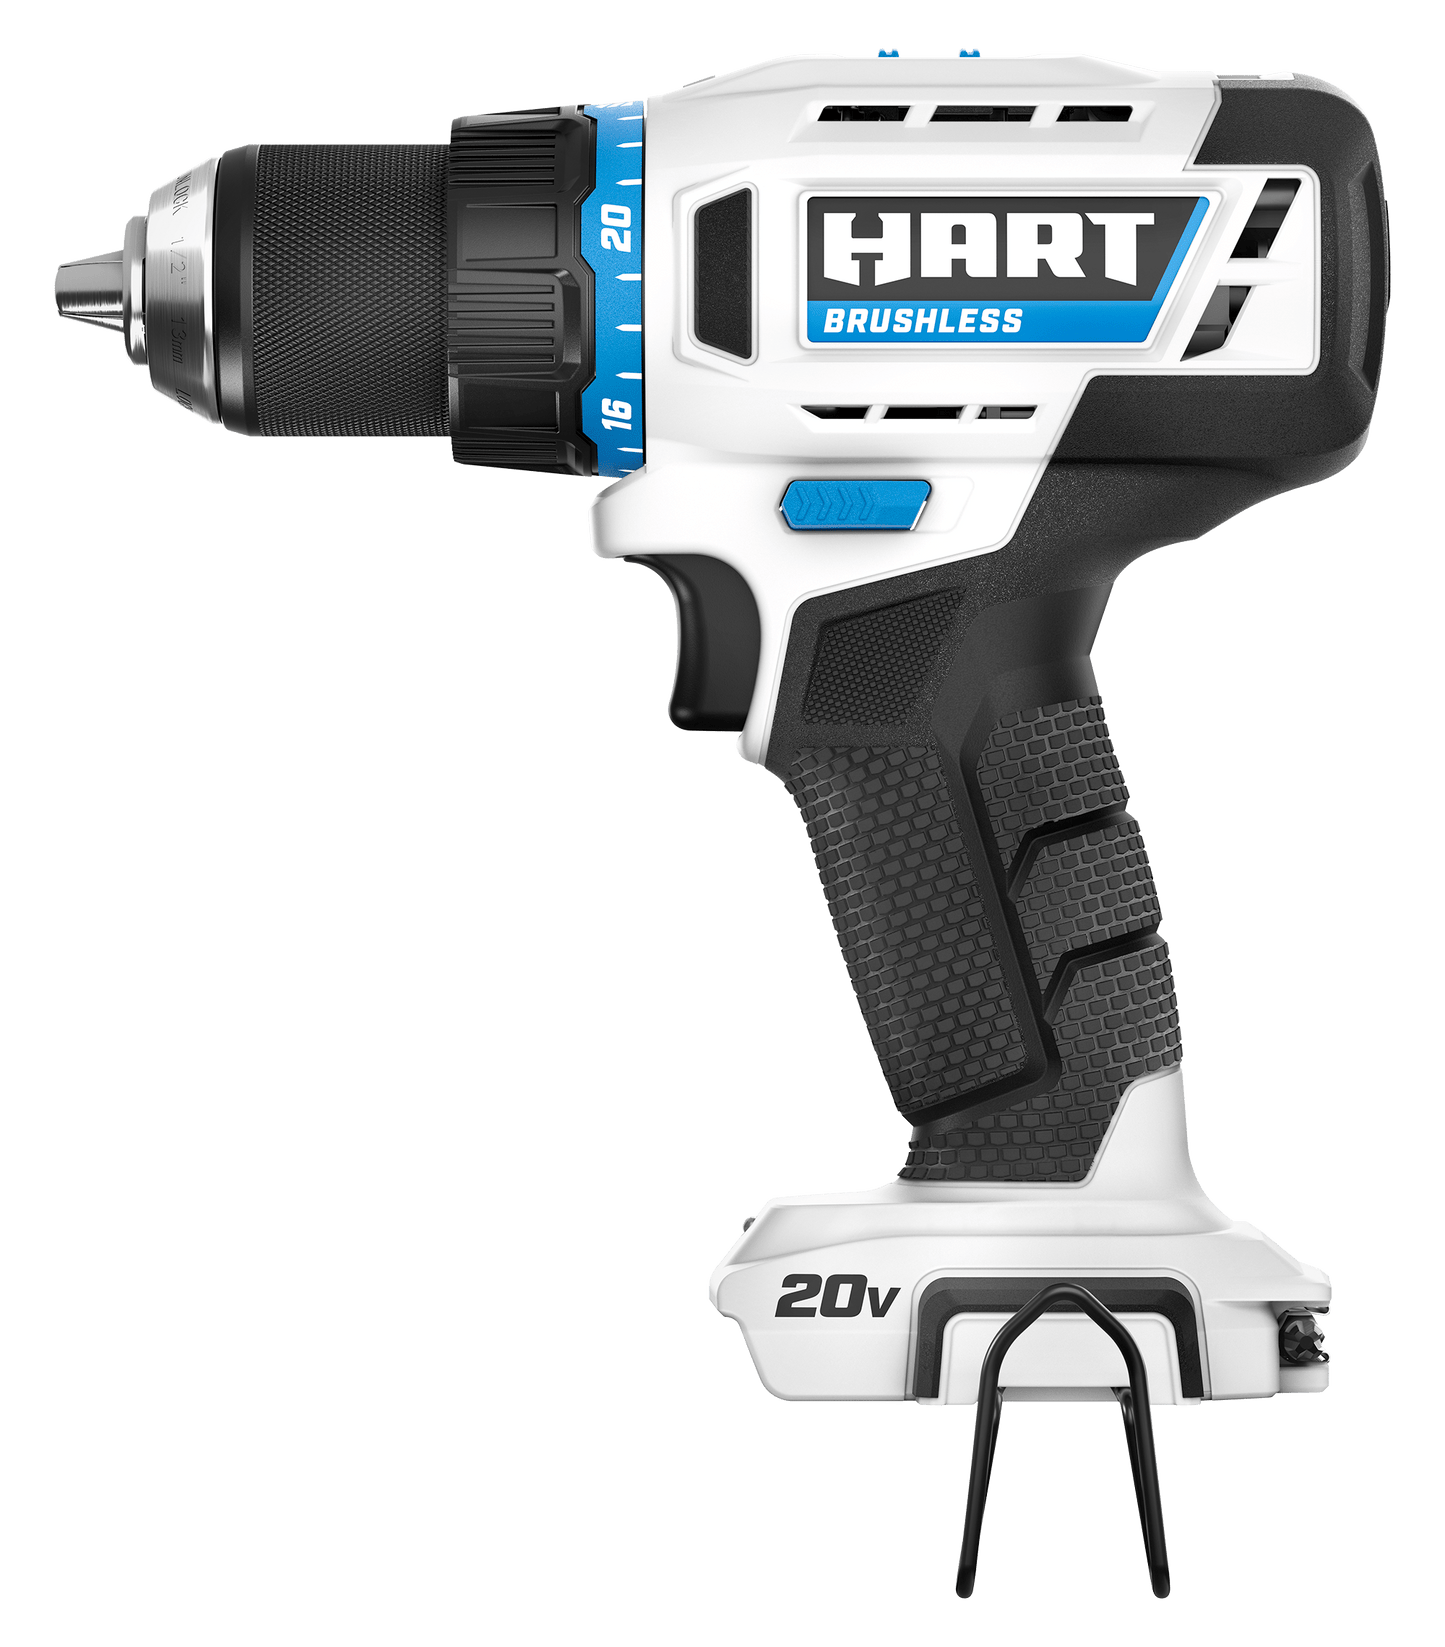 20V 1/2" Brushless Drill/Driver (Battery and Charger not Included)